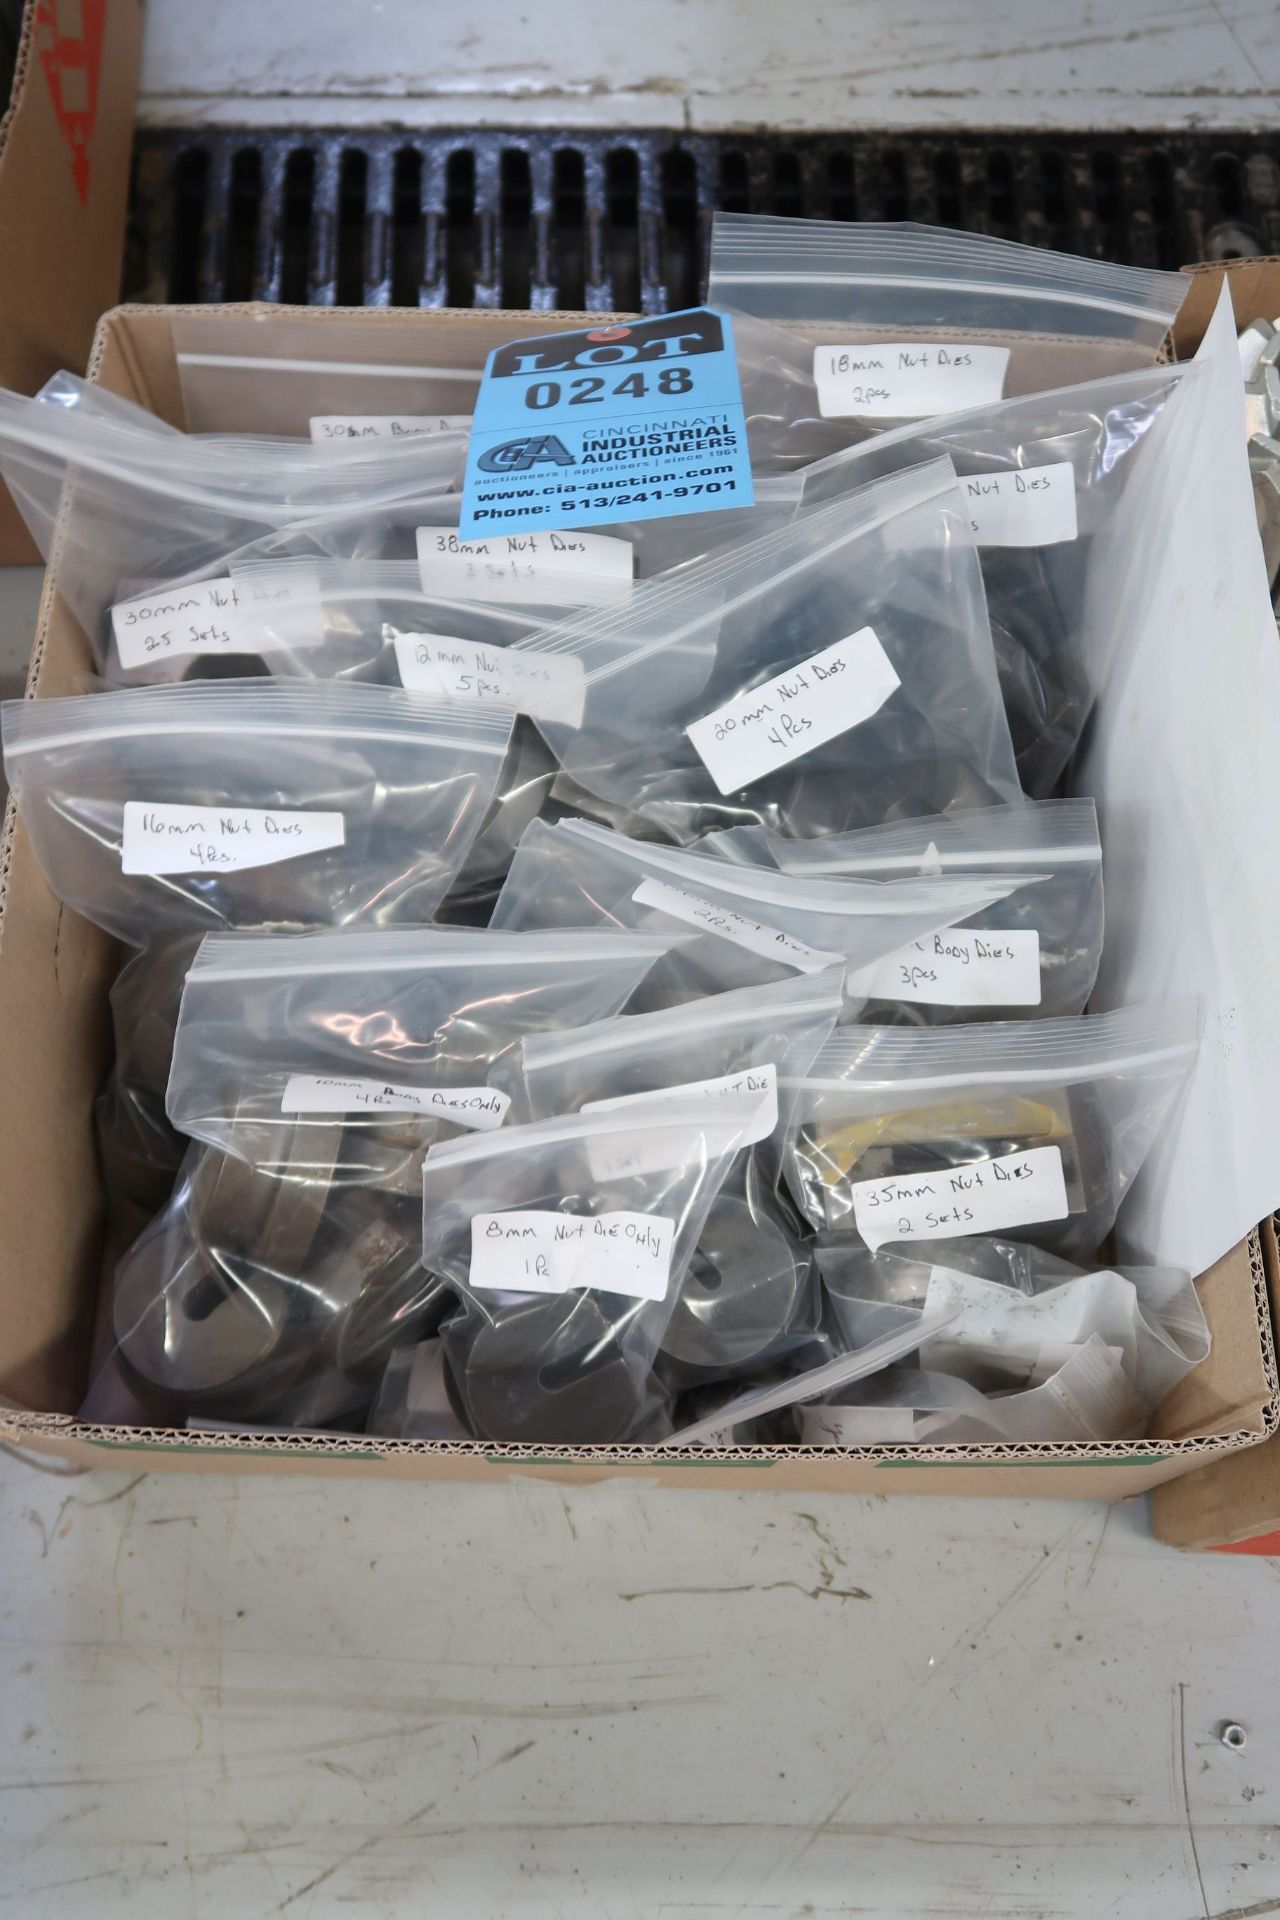 (LOT) ASSORTED PRESETTING METRIC BODY DIES (E02), AND METRIC NUT DIES (E02), APPROX. (65) PIECES, IN